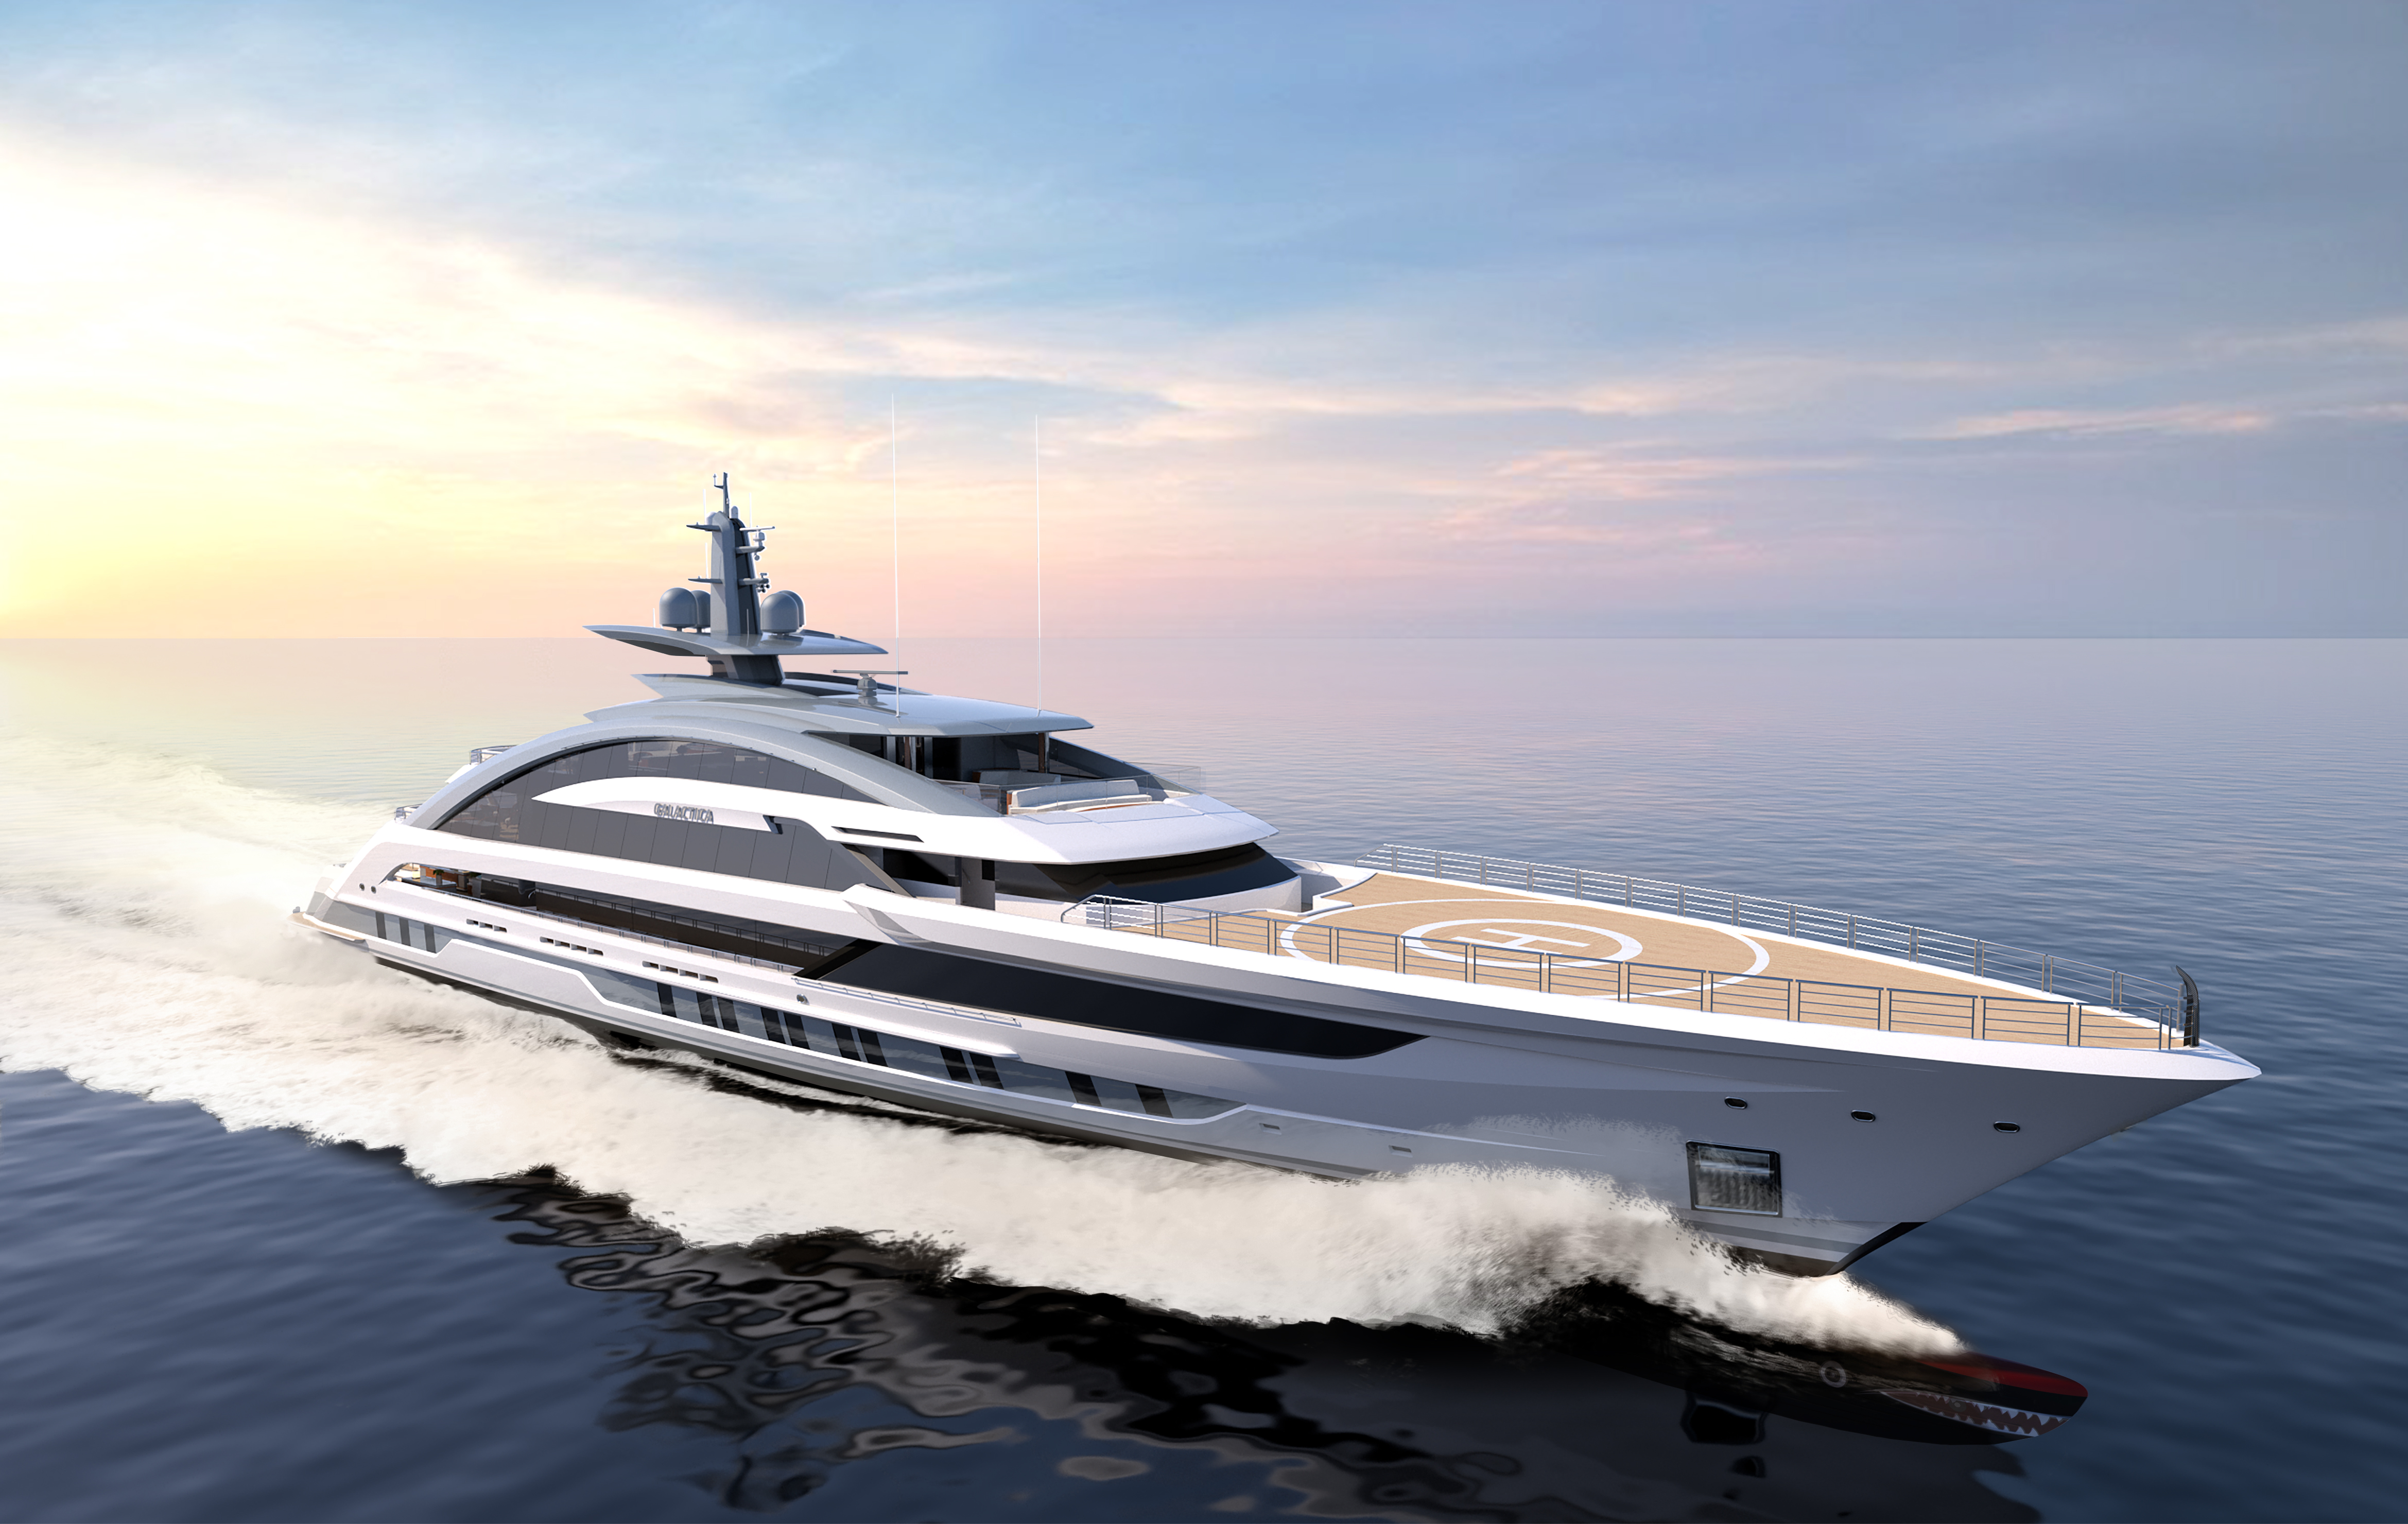 Luxury superyacht Project Cosmos by Heesen Yachts